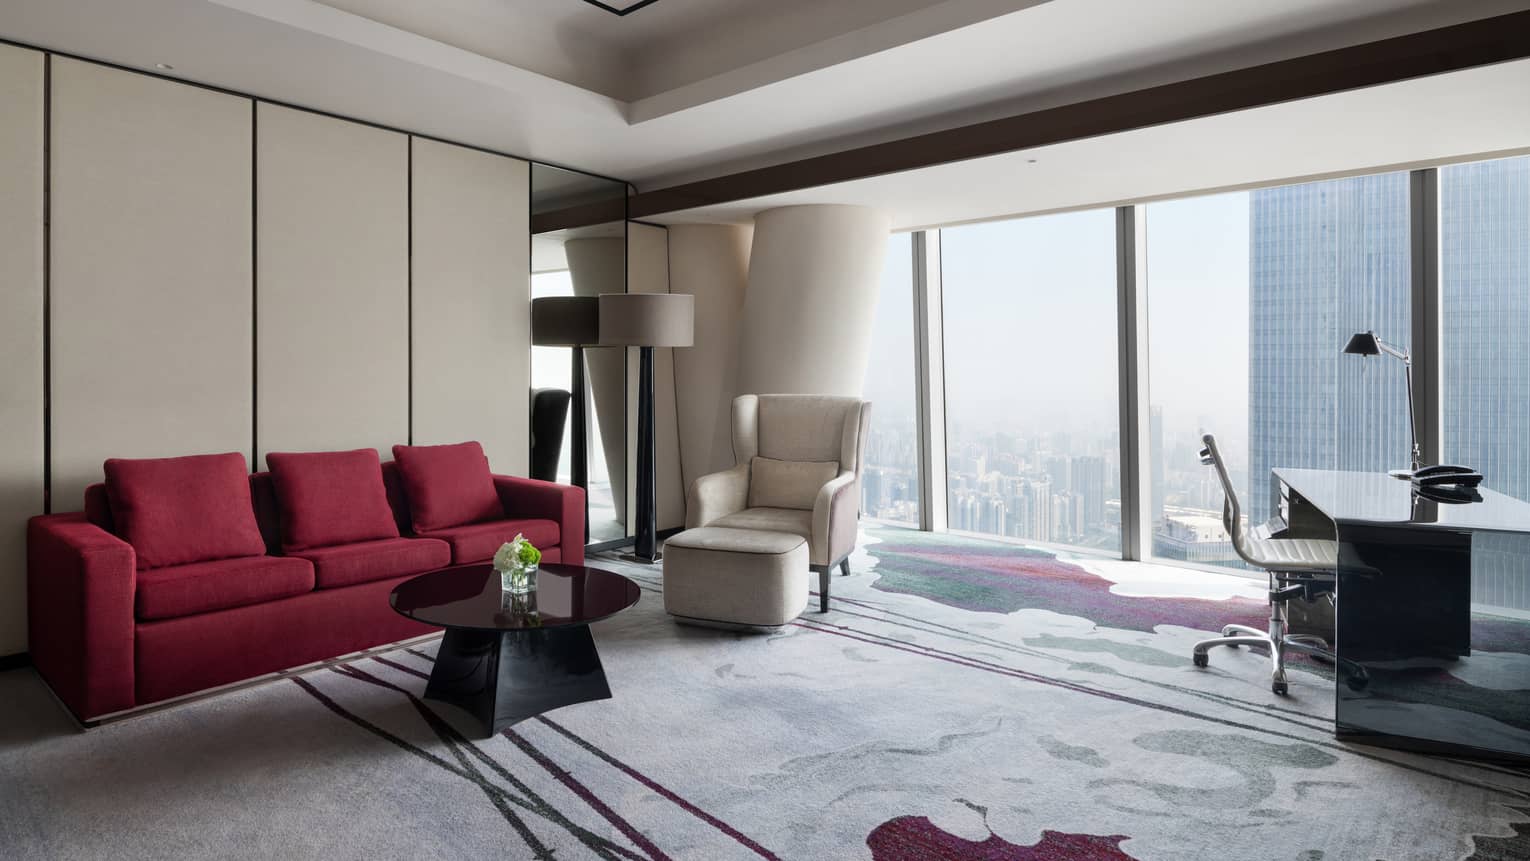 Deluxe King River View Suite living area with red sofa and floor-to-ceiling windows